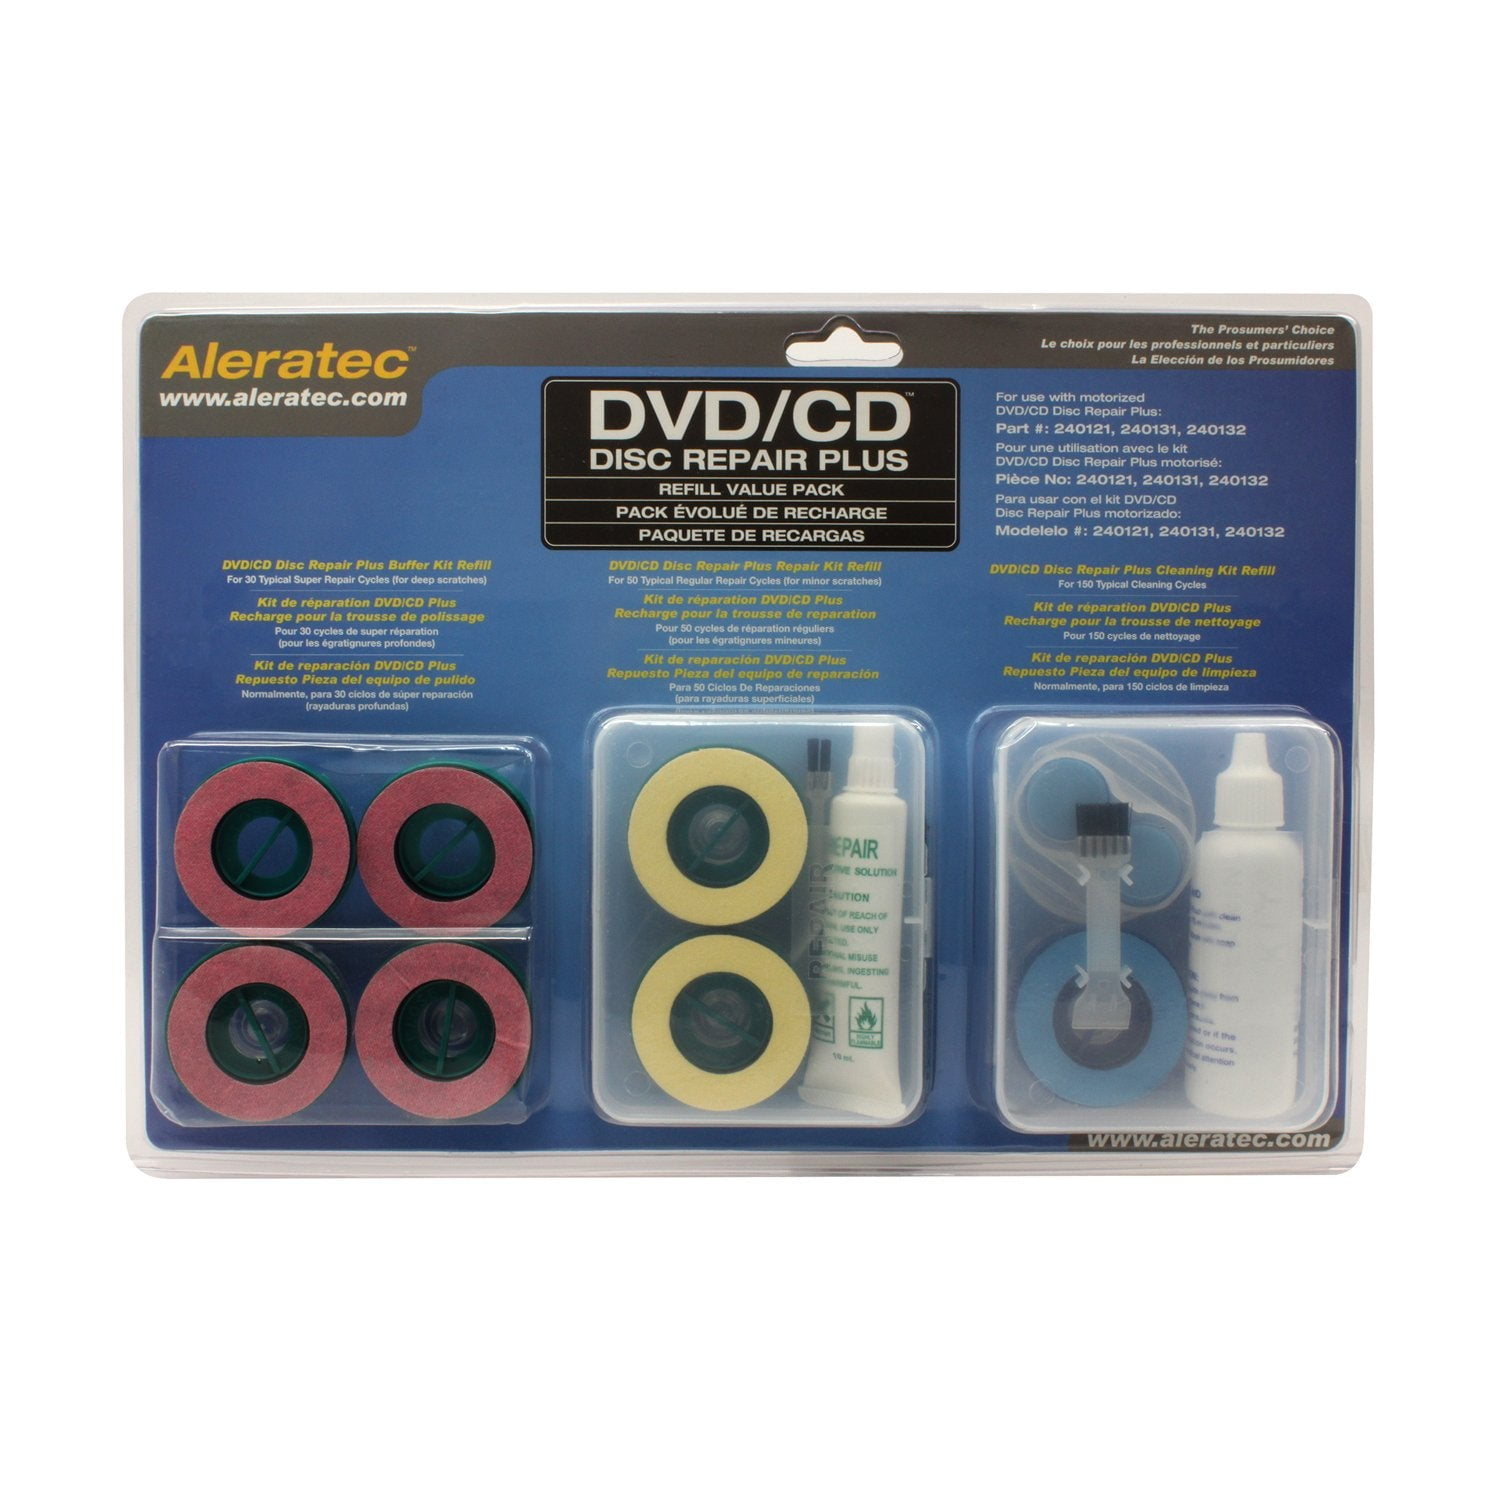 Maxell Disc Scratch Repair Kit, Size: None